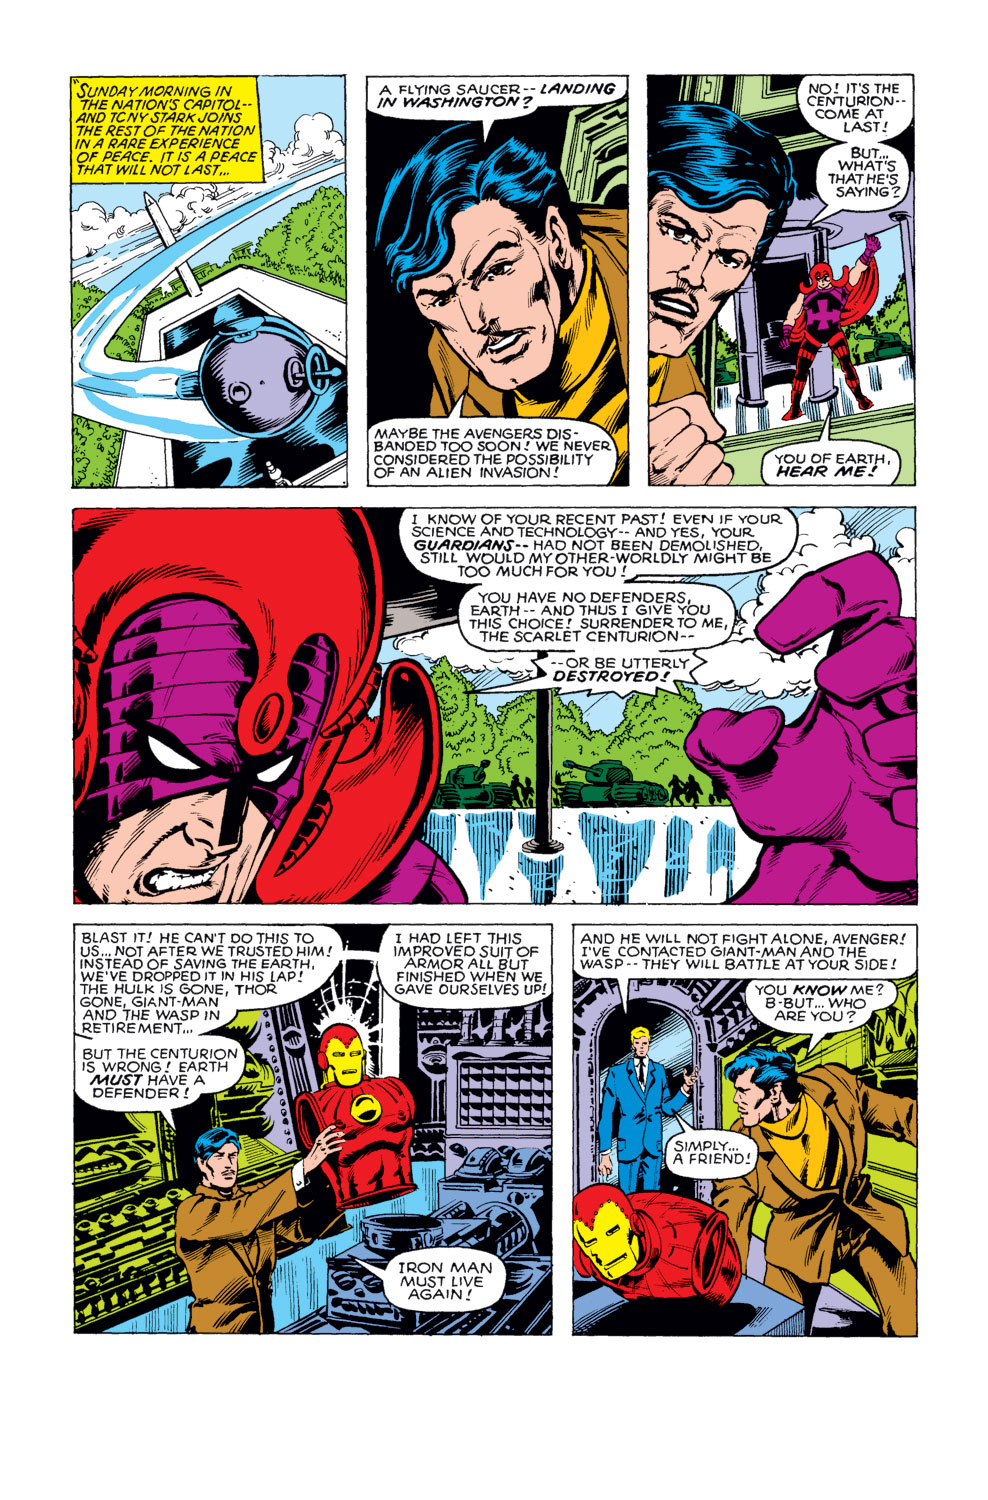 What If? (1977) issue 29 - The Avengers defeated everybody - Page 14